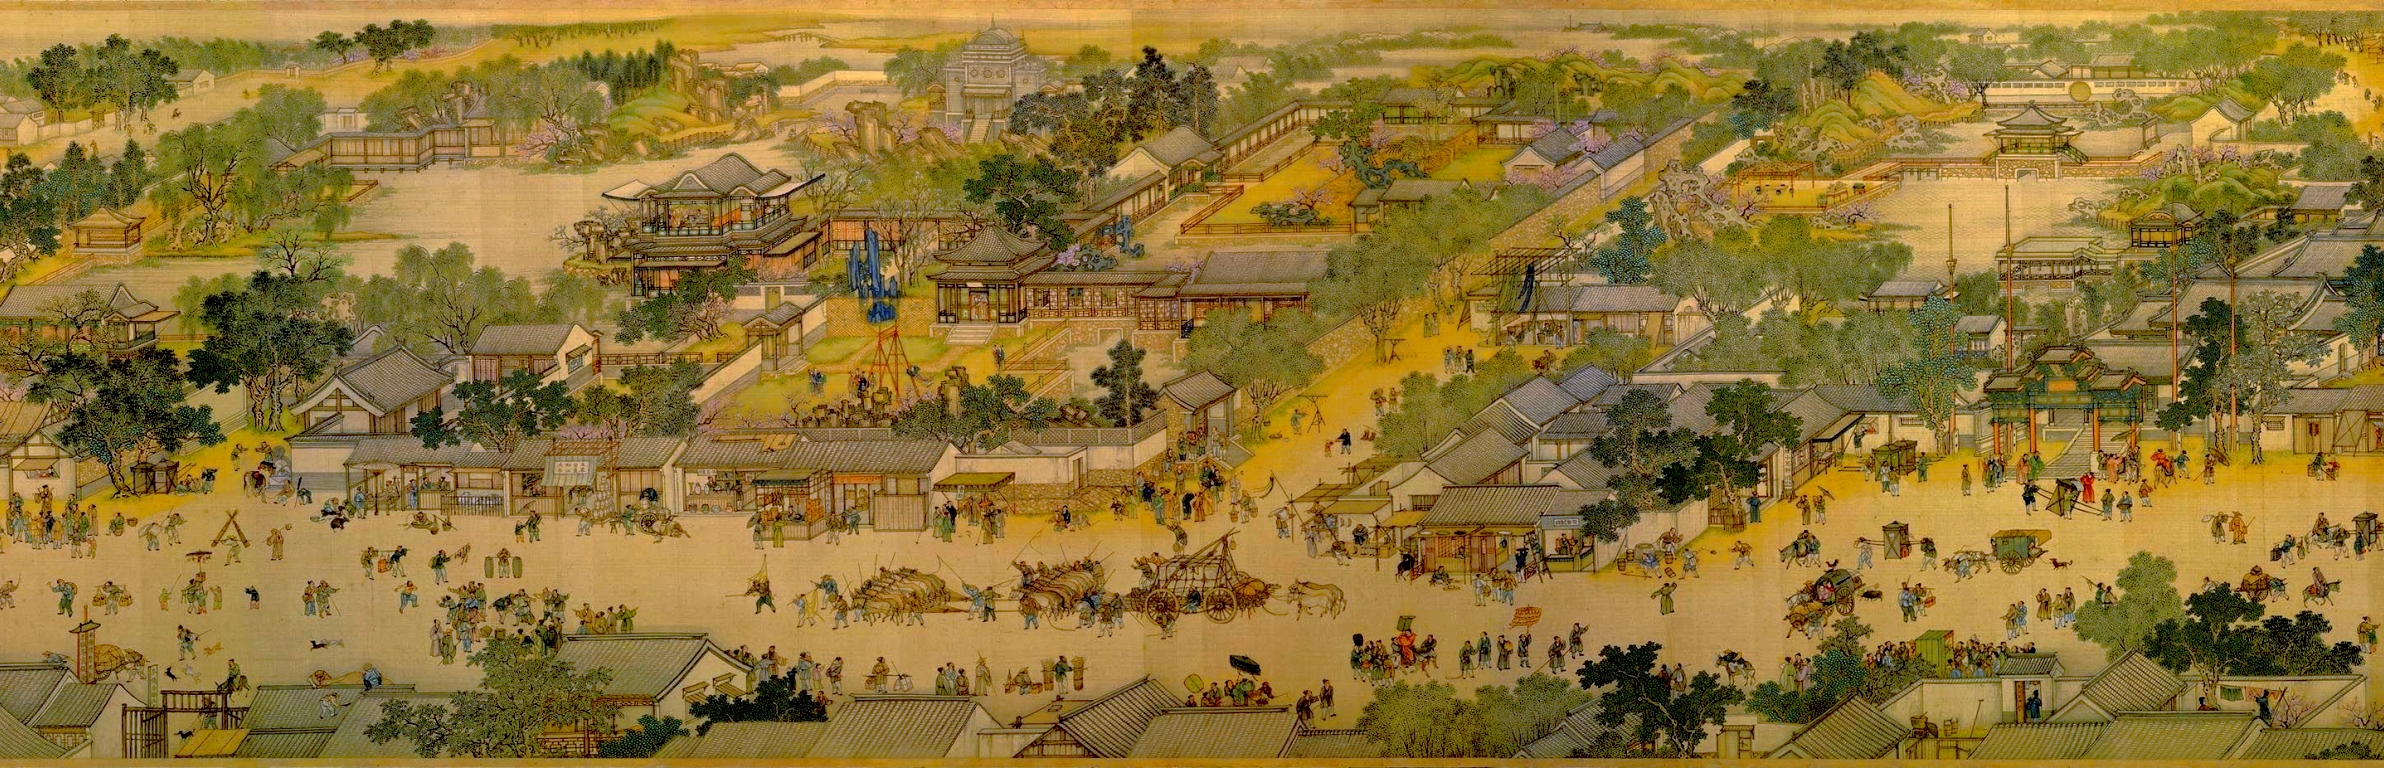 chinese art perspective   Ecosia